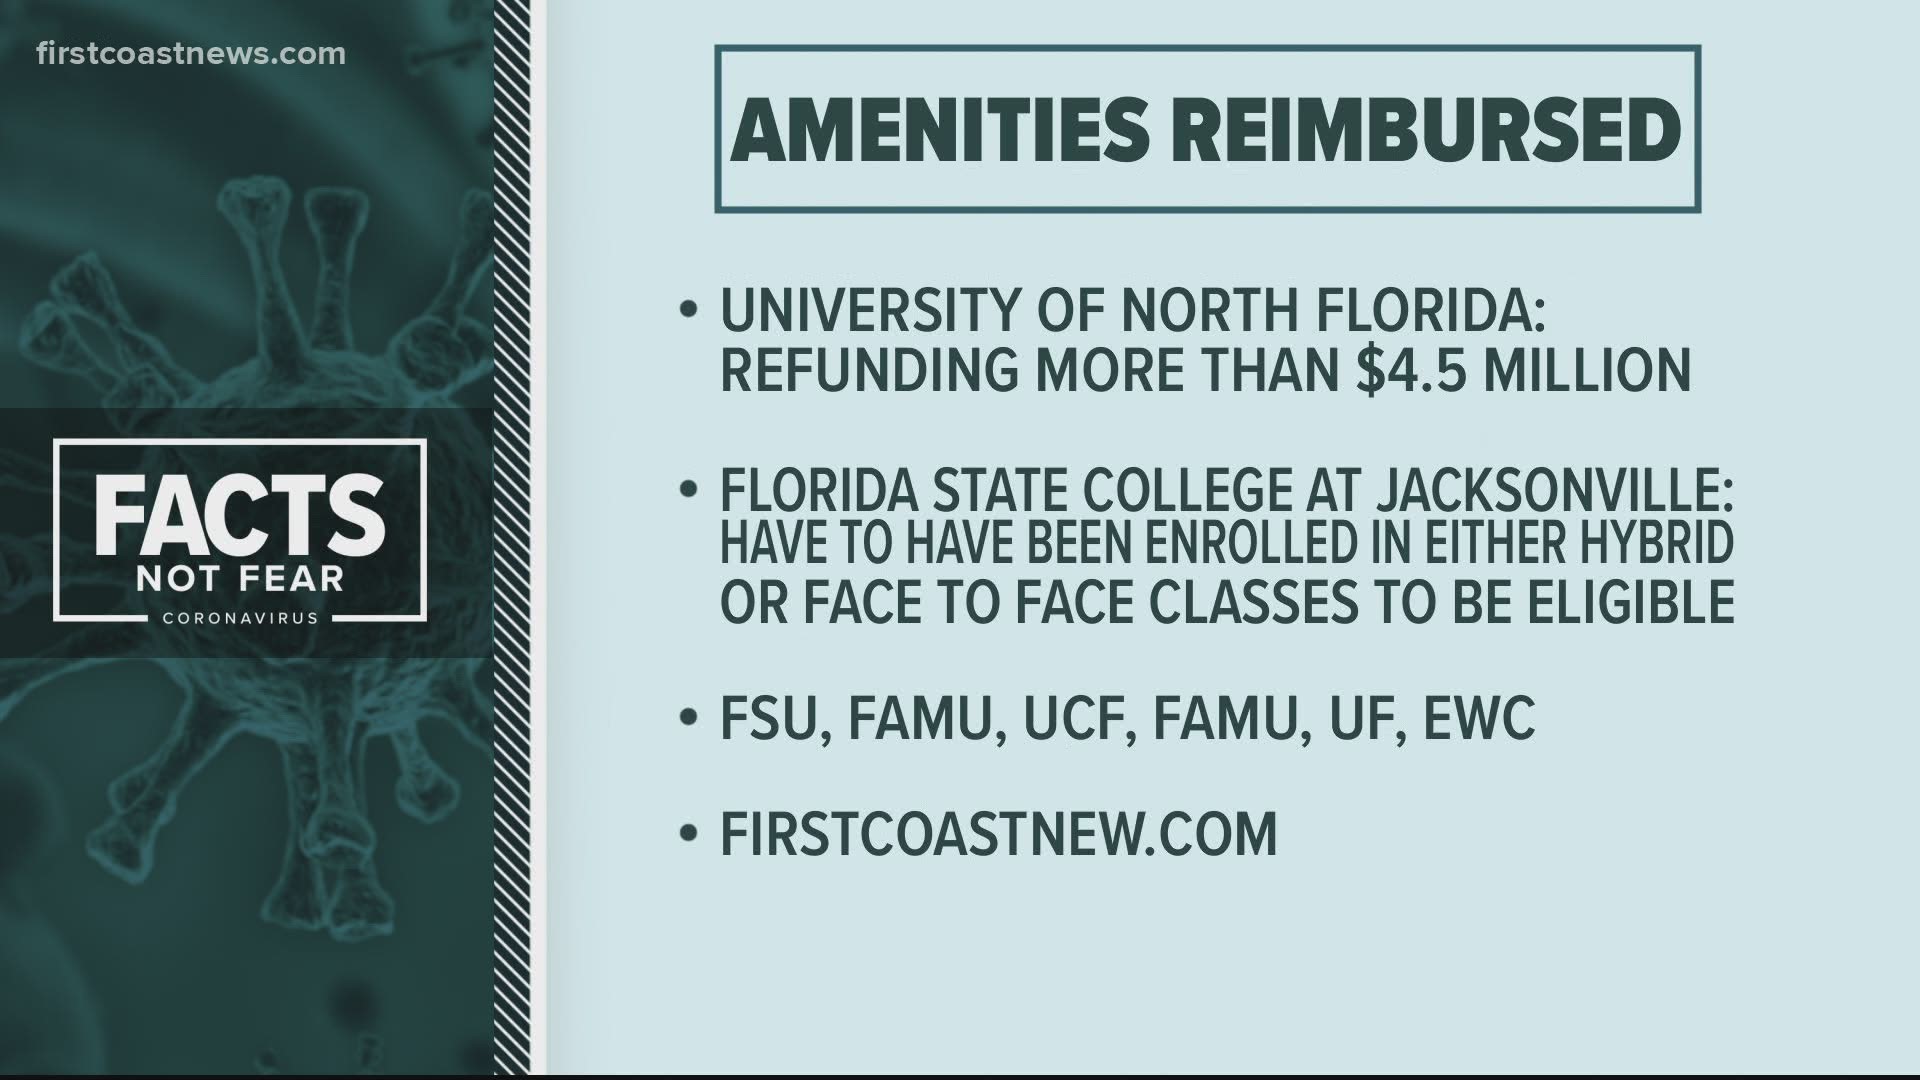 College and university students across the state of Florida are being reimbursed for amenities they may not have been able to use due to the COVID-19 pandemic.